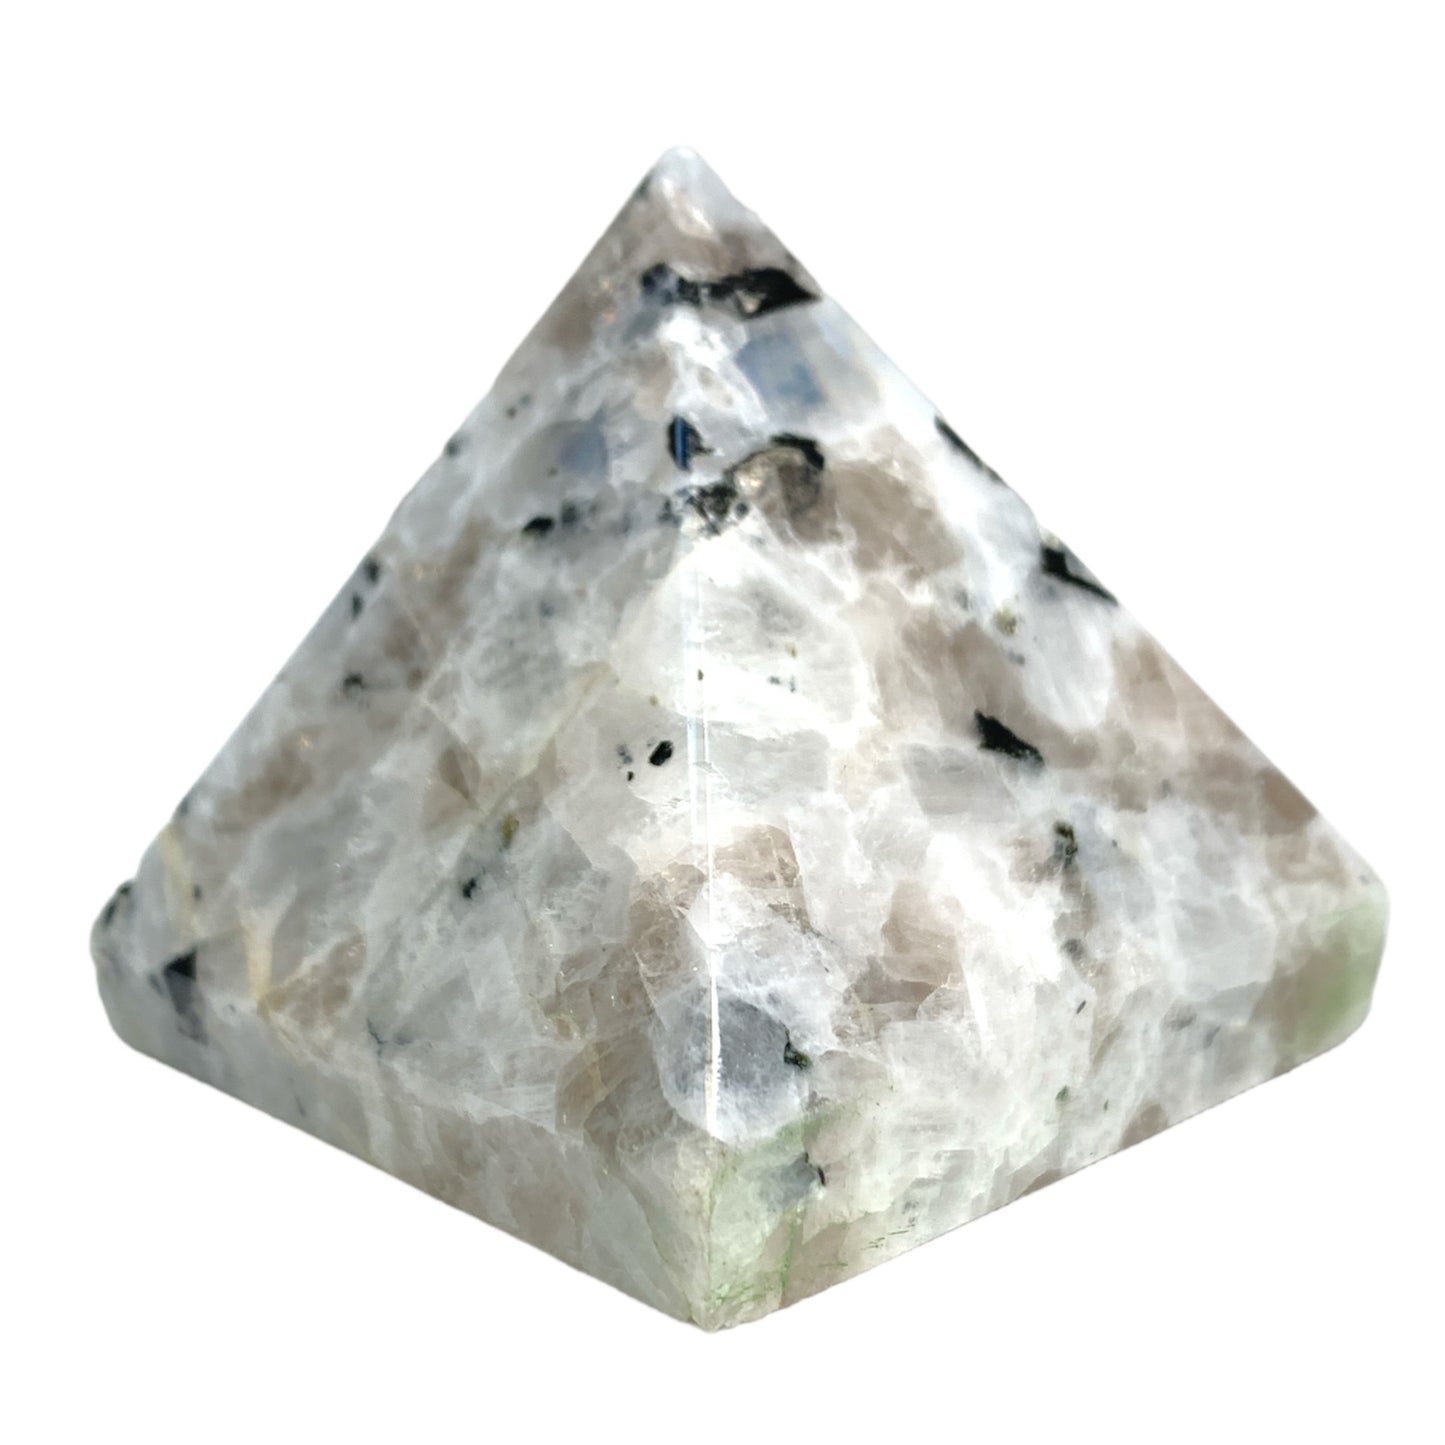 Rainbow Moonstone - Pyramids - 40 to 60mm - Price per gram per piece (B2B ordering 1 = 1 piece so we charge Ex. 60g = $7.20 each)